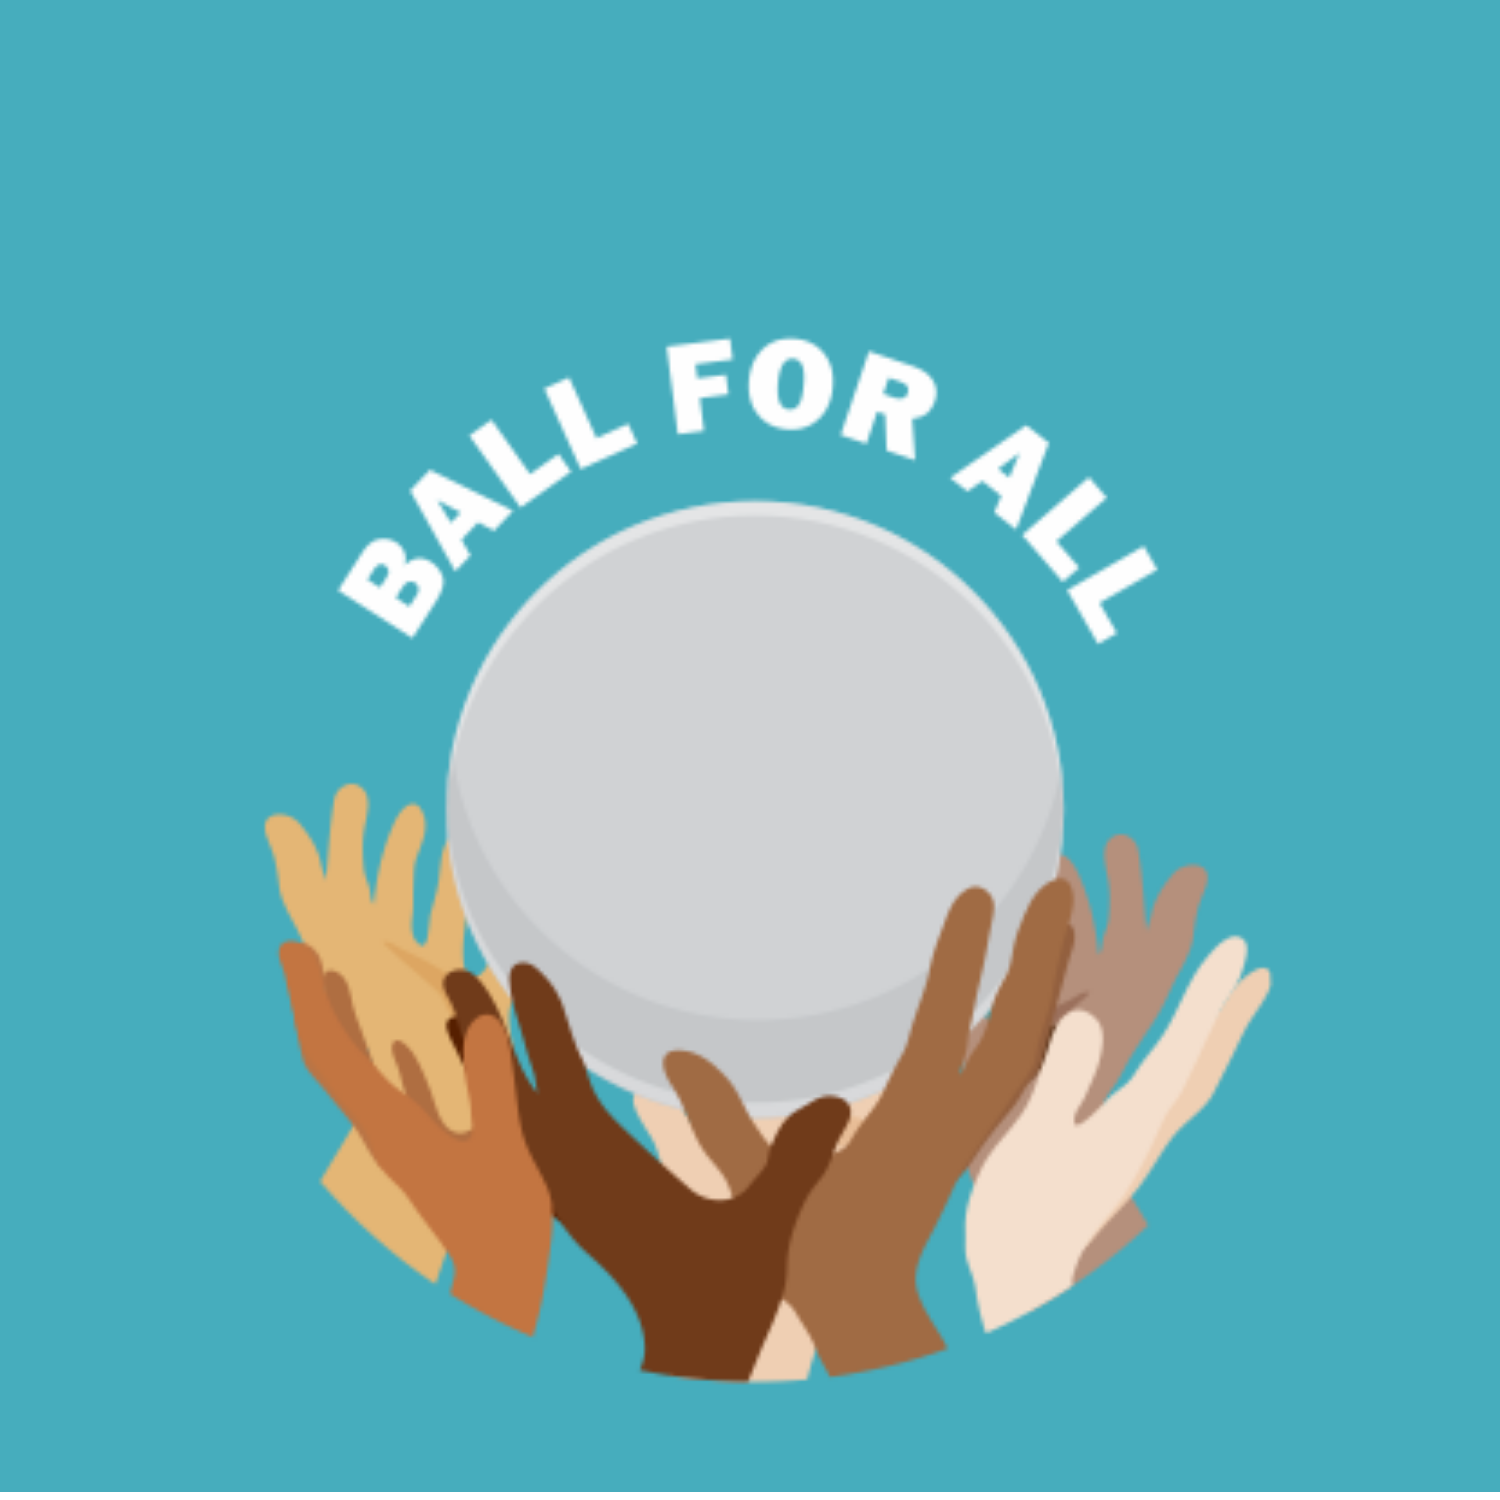 Ball for All